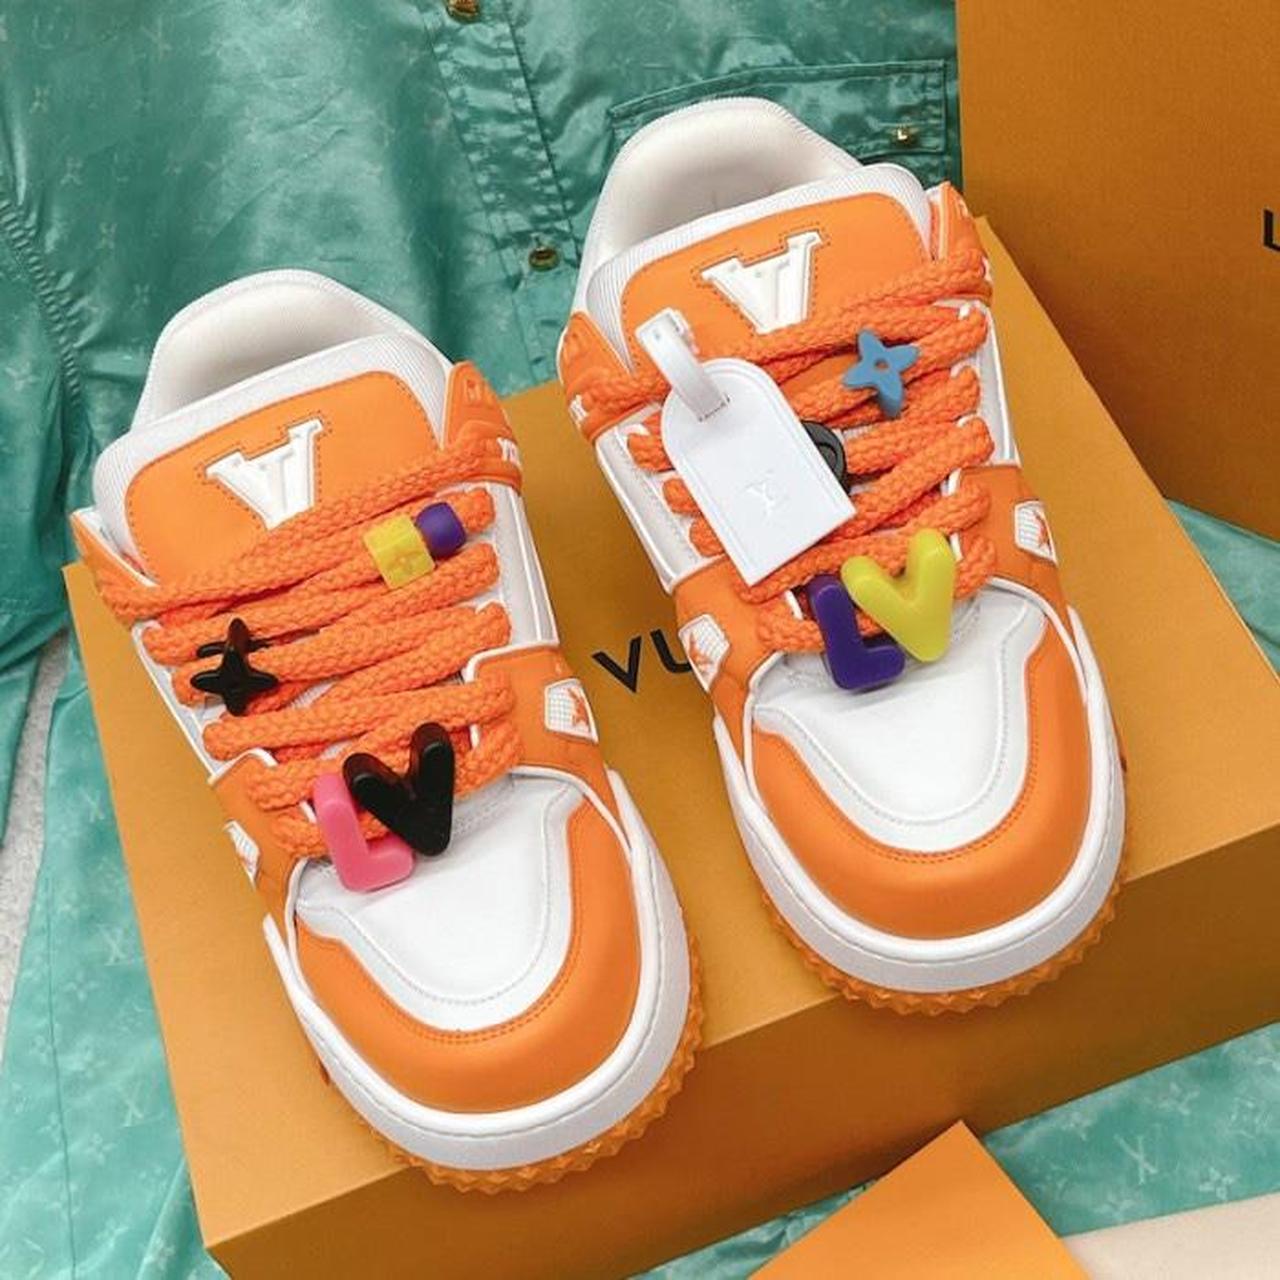 LOUIS VUITTON TRAINER MAXI LOW-TOP SNEAKERS IN WHITE AND ORANGE